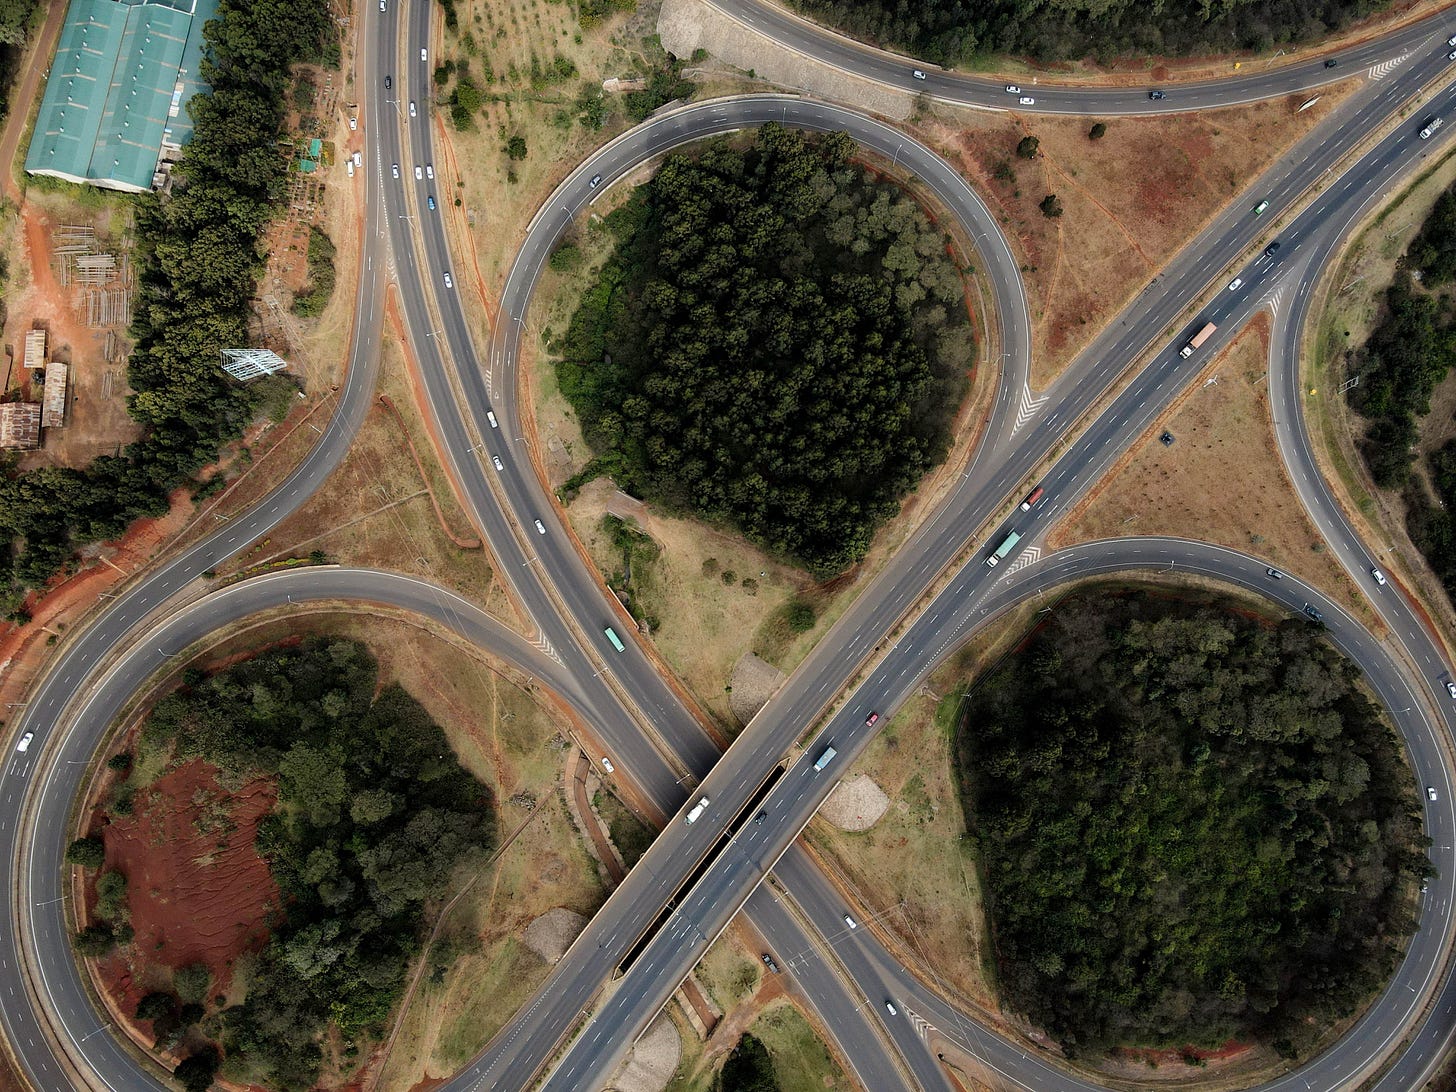 A cloverleaf highway design with clumps of trees in between.